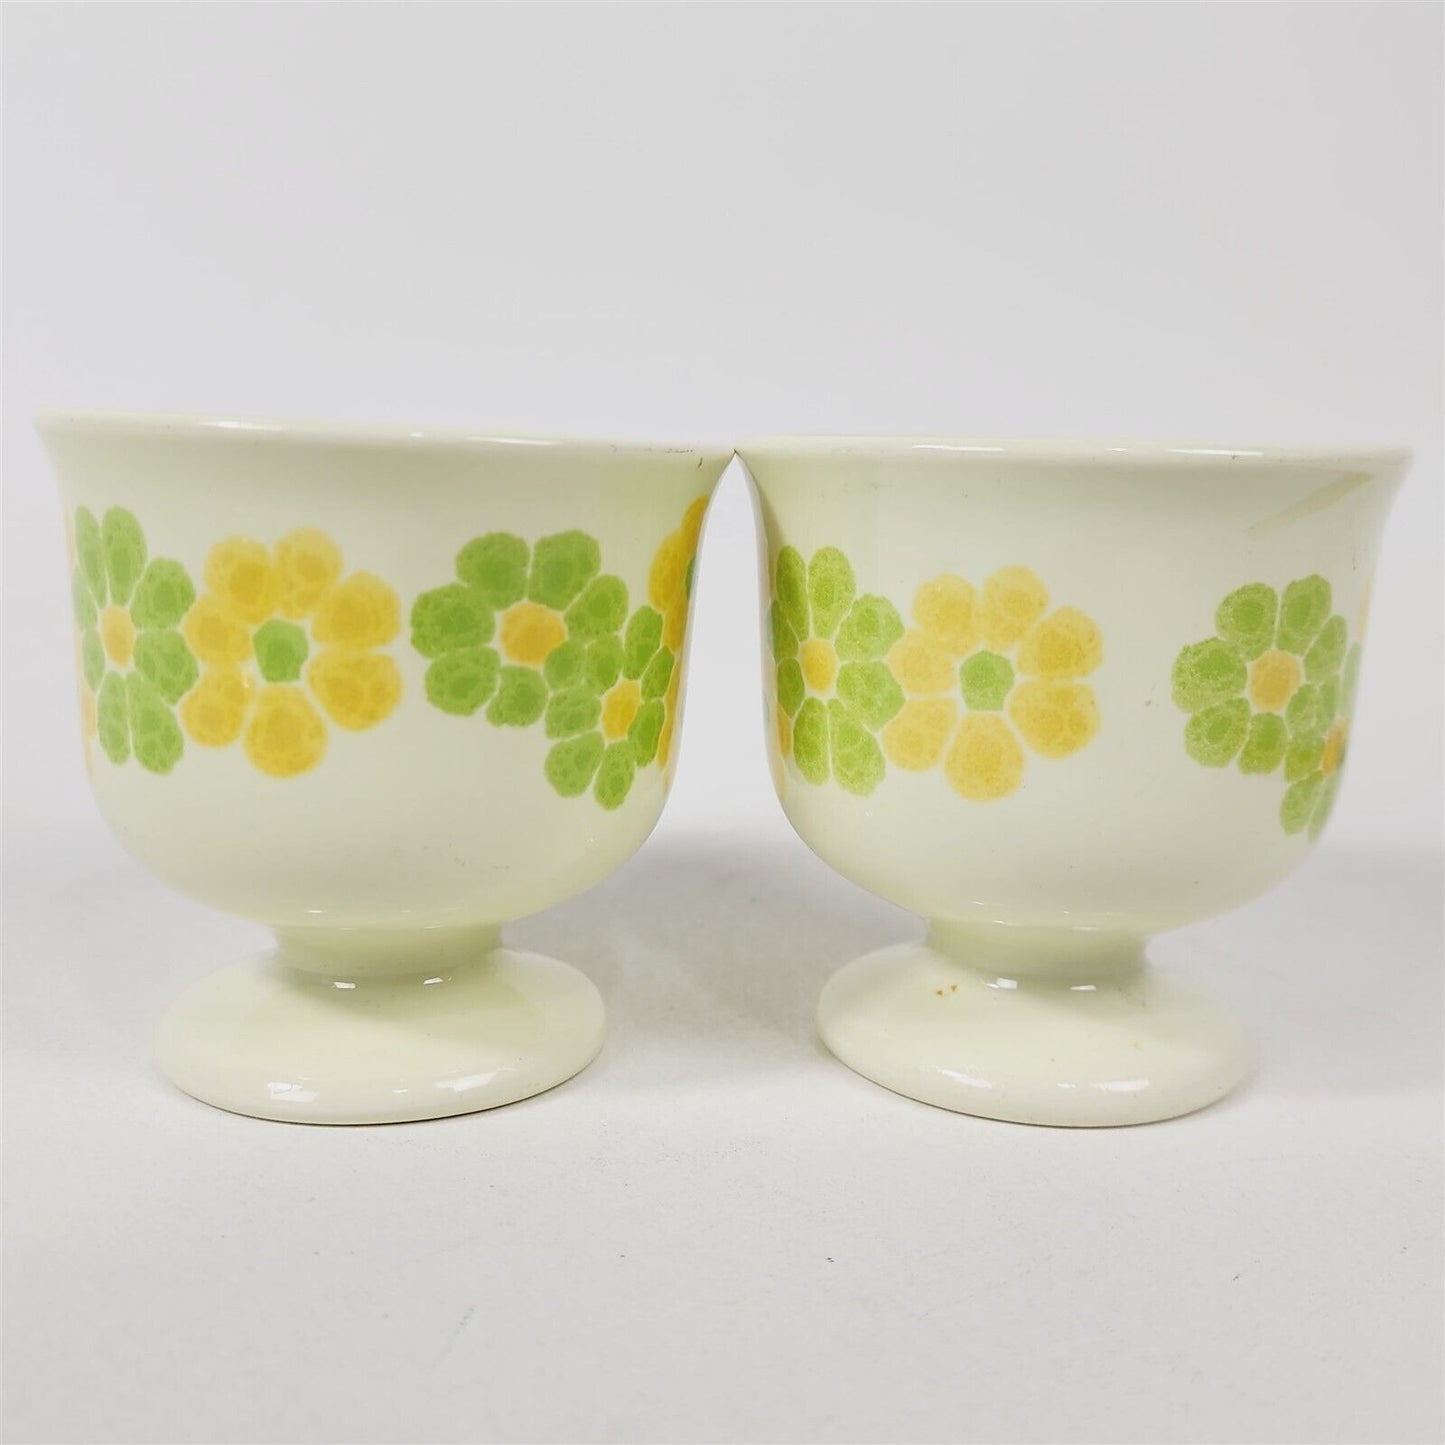 Vtg Franciscan Earthenware Picnic Green Yellow Floral Footed Coffee Mugs Saucer